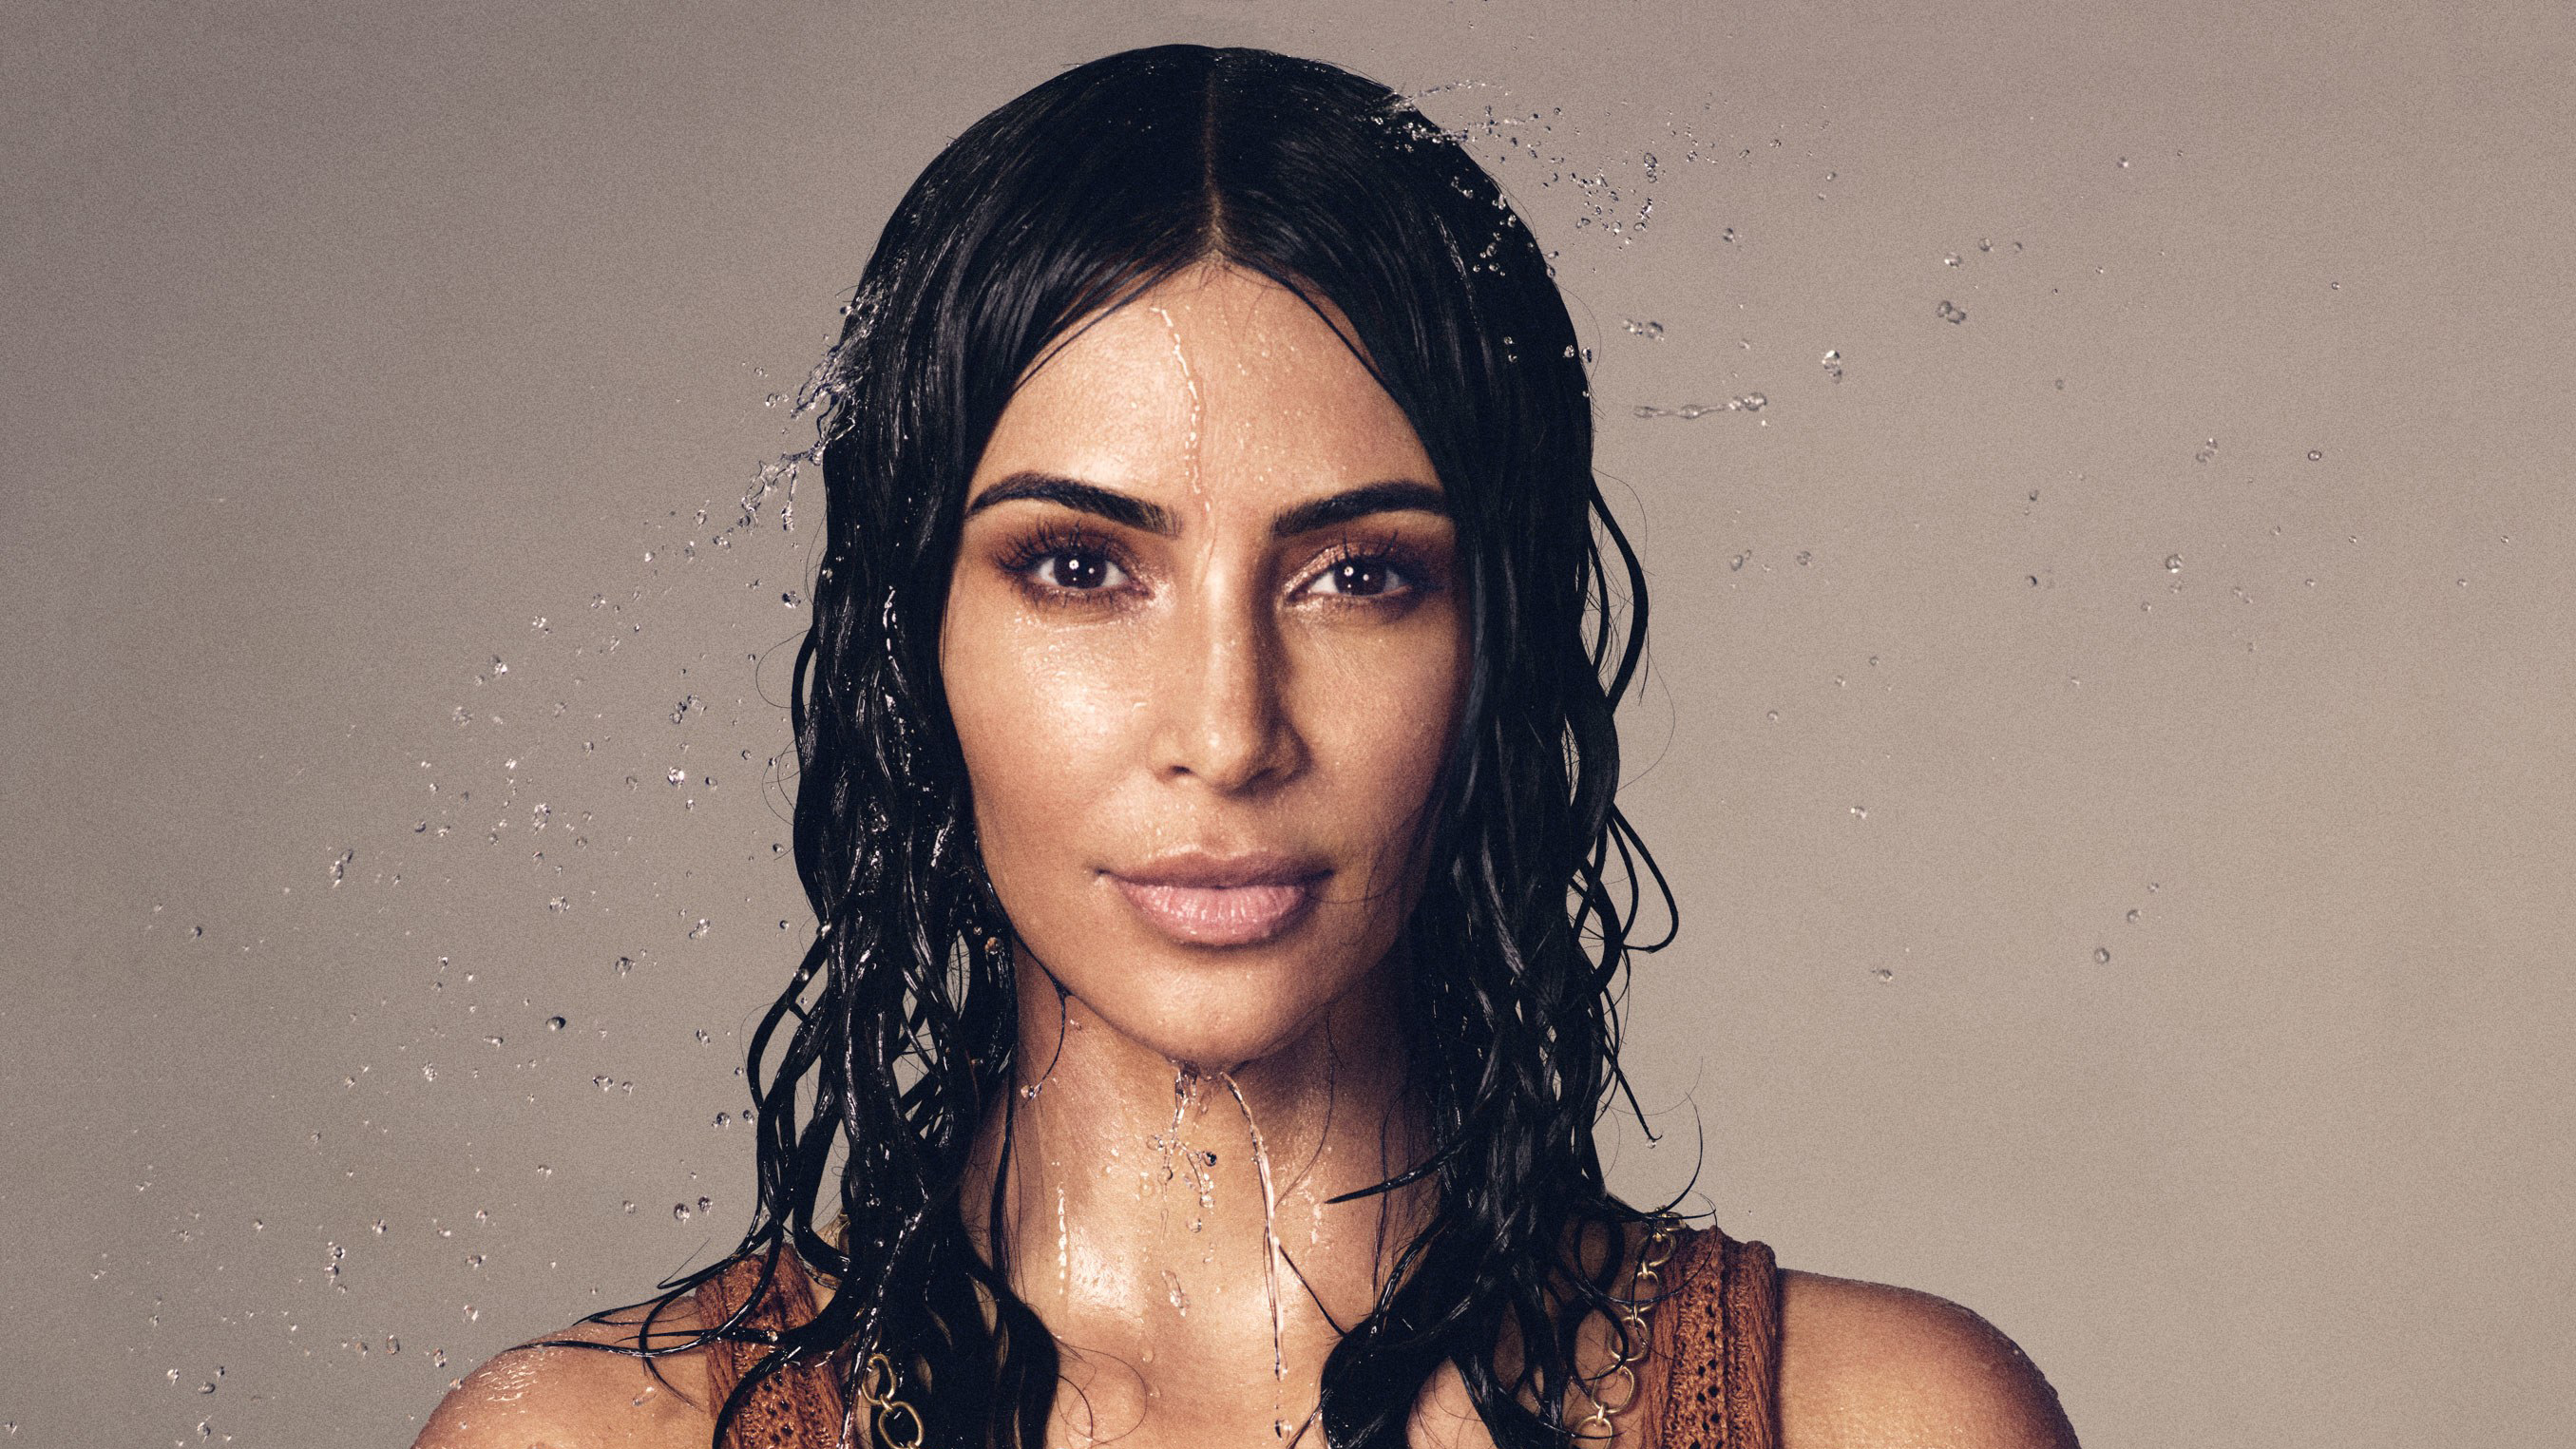 Kim Kardashian Vogue 2019 Latest, HD Celebrities, 4k Wallpapers, Image, Backgrounds, Photos and Pictures